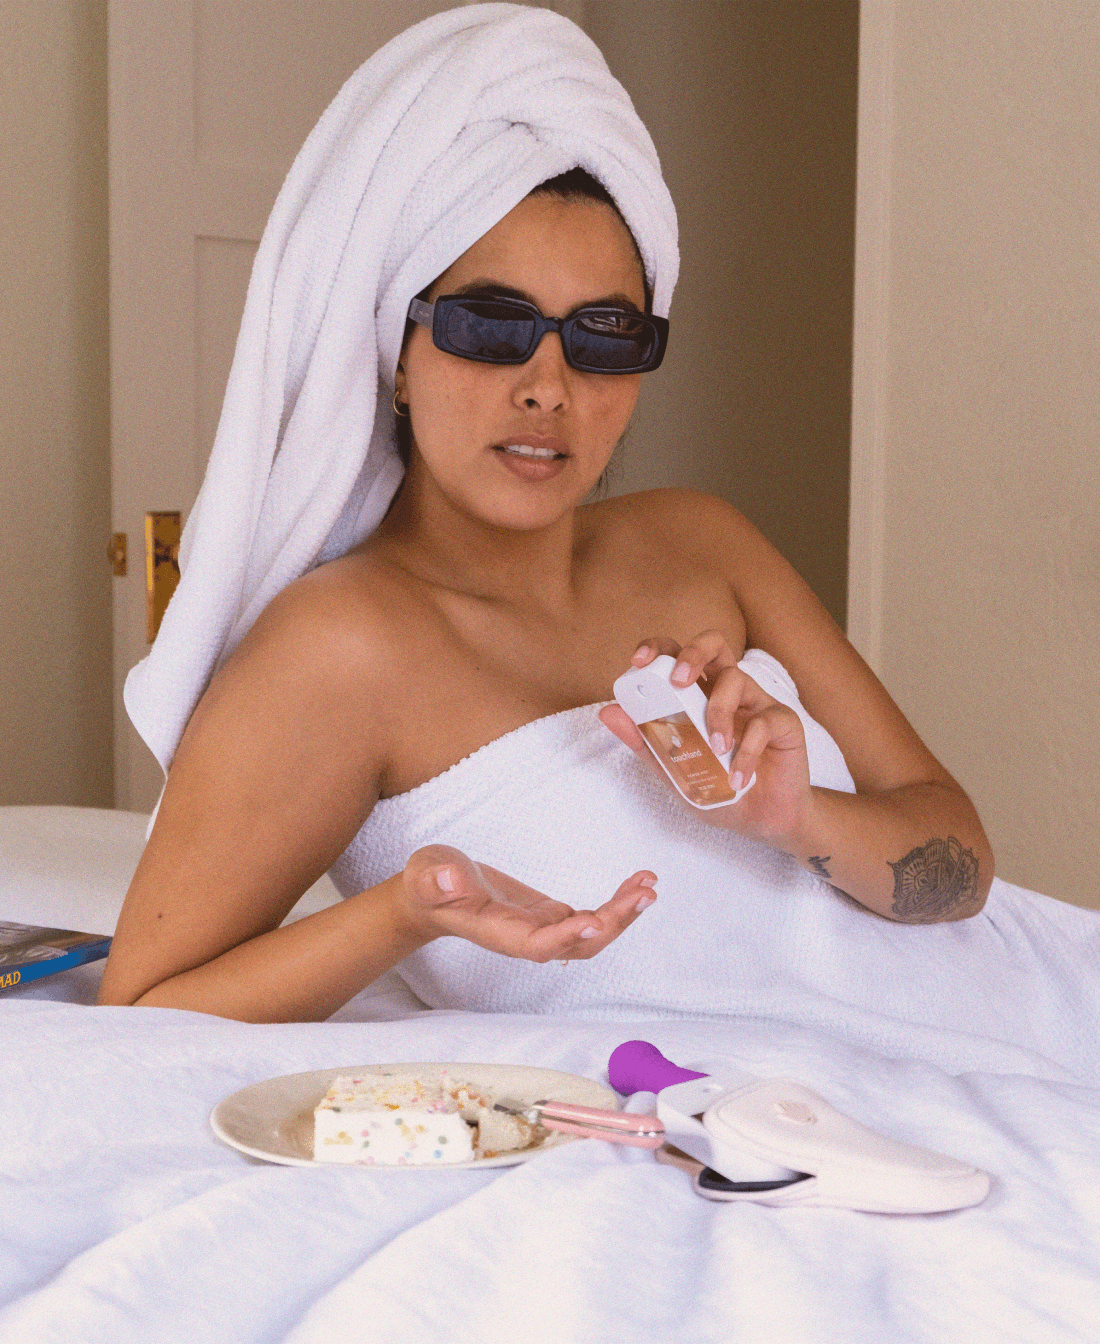 A woman with a towel wrapped around her head using our Velvet Peach Touchland.